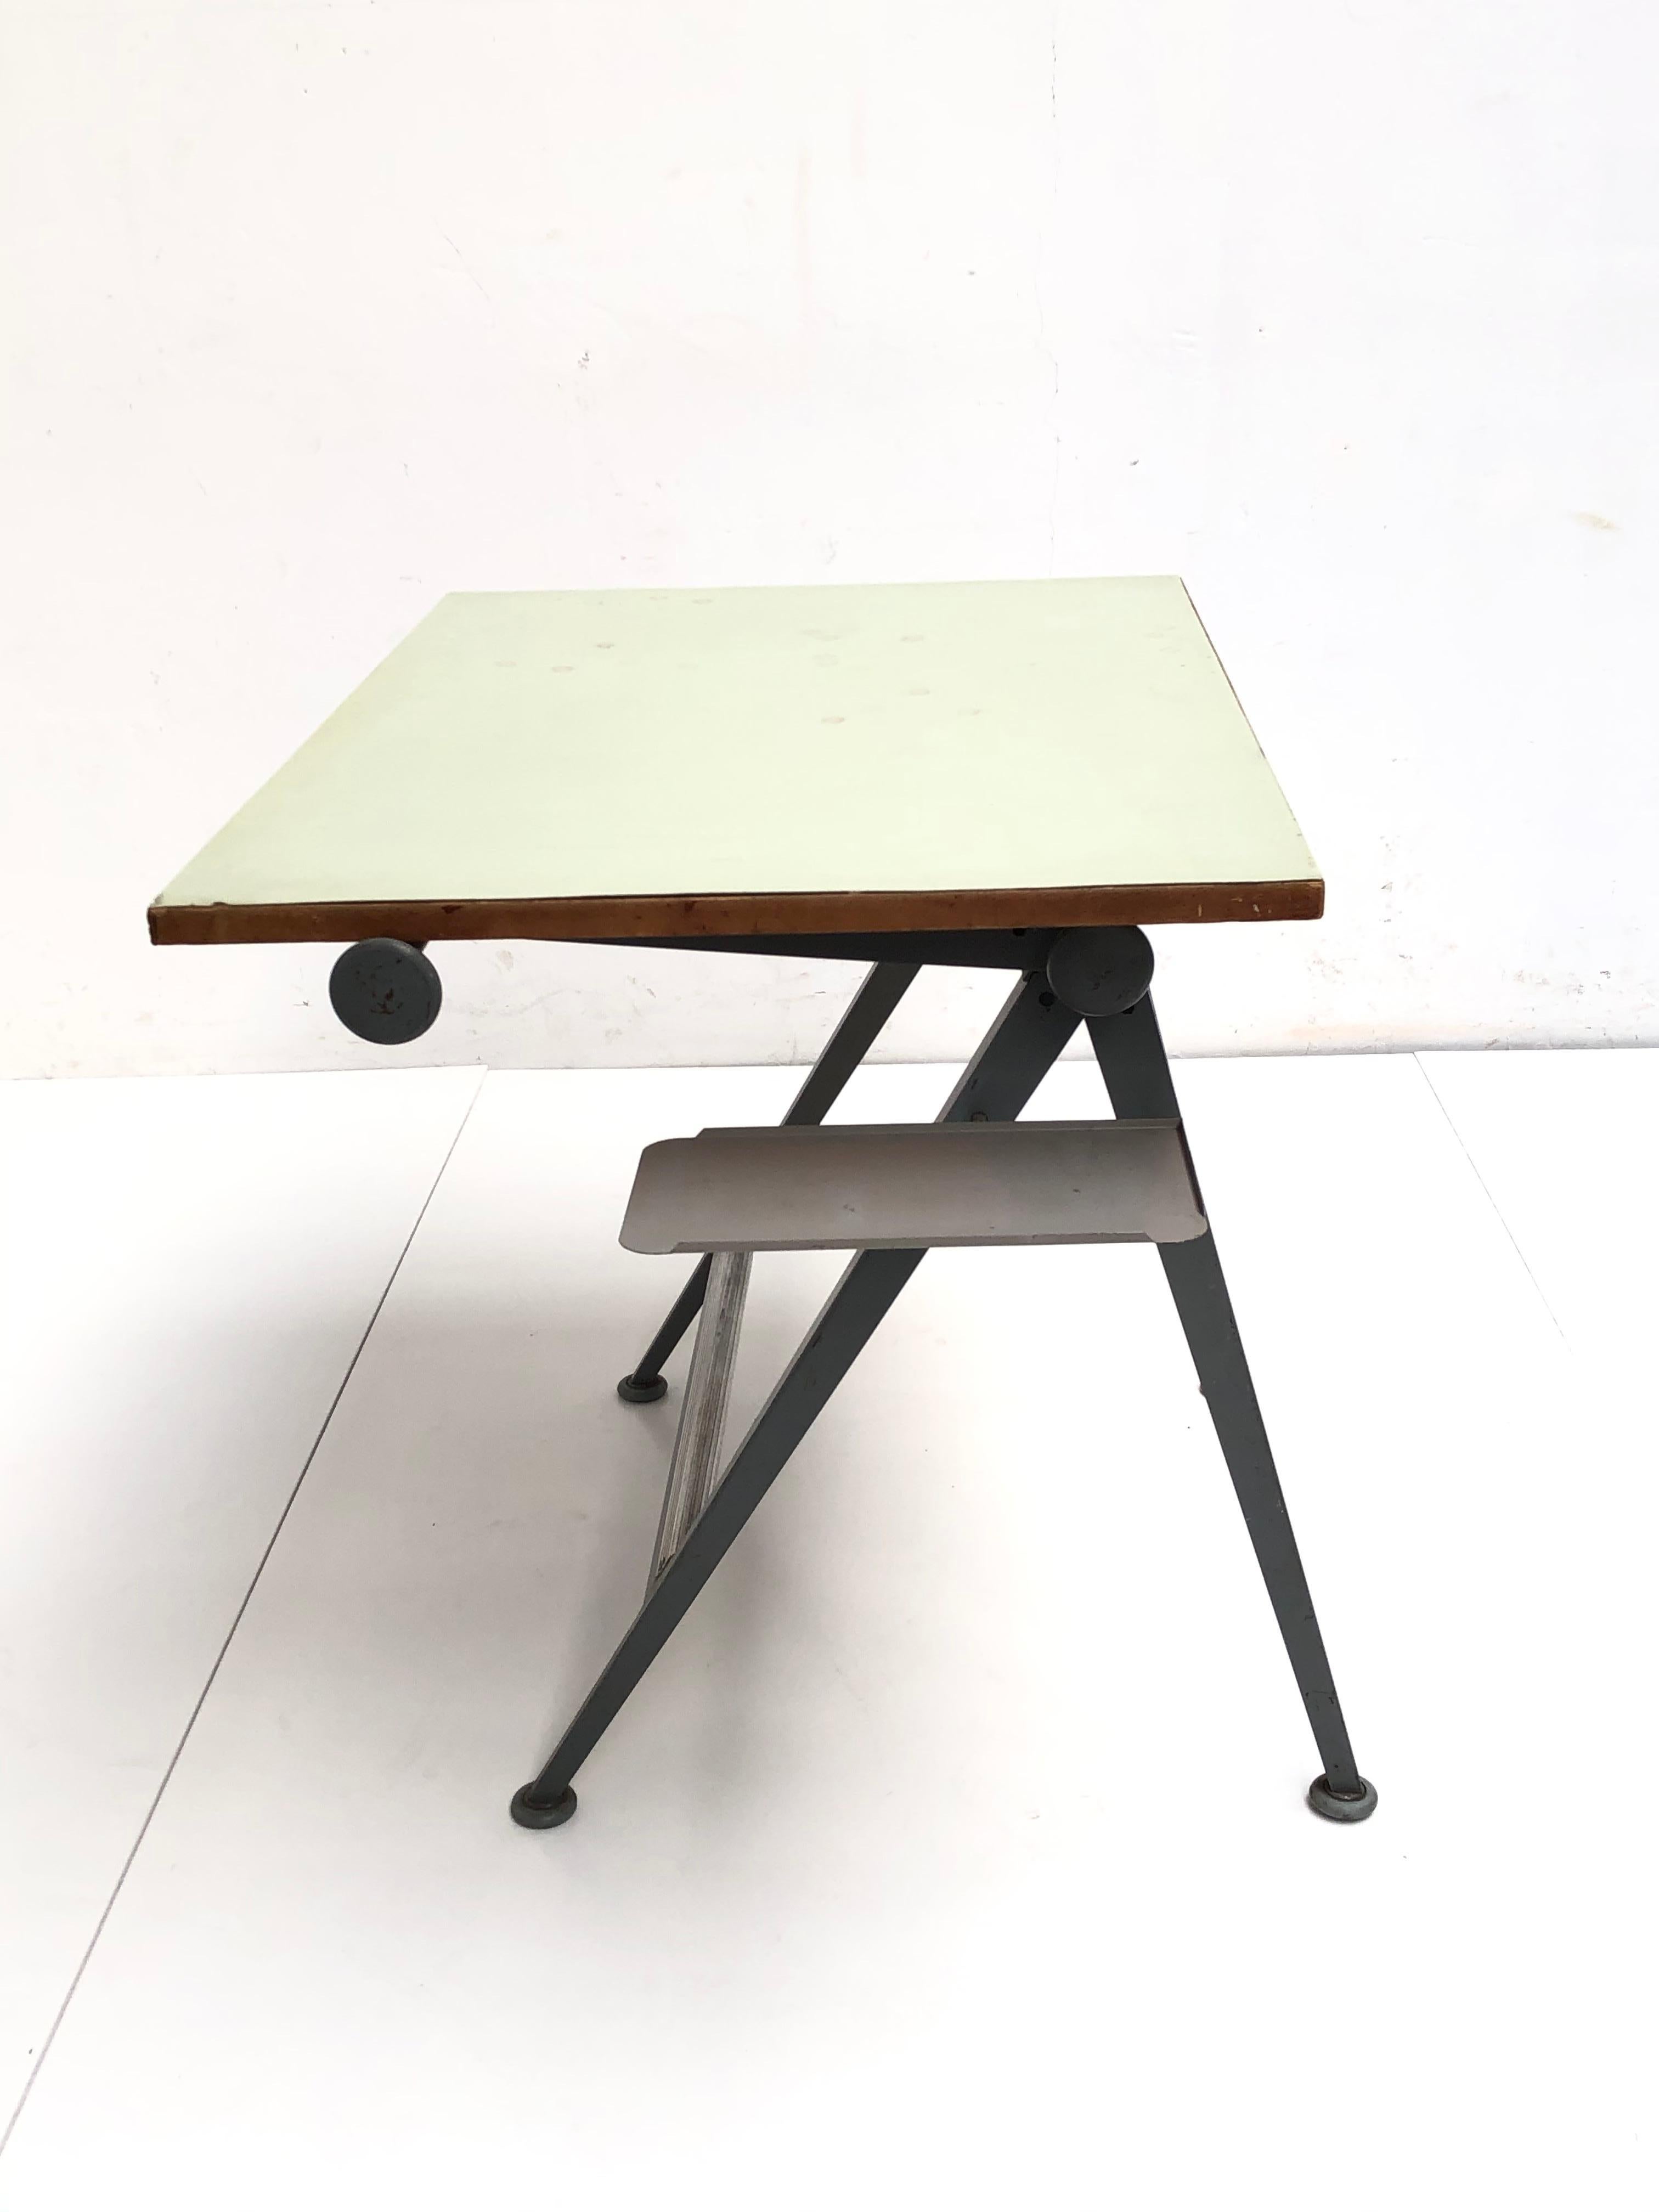 Wim Rietveld and Friso Kramer Reply Drafting Table 1959 Ahrend the Netherlands 7